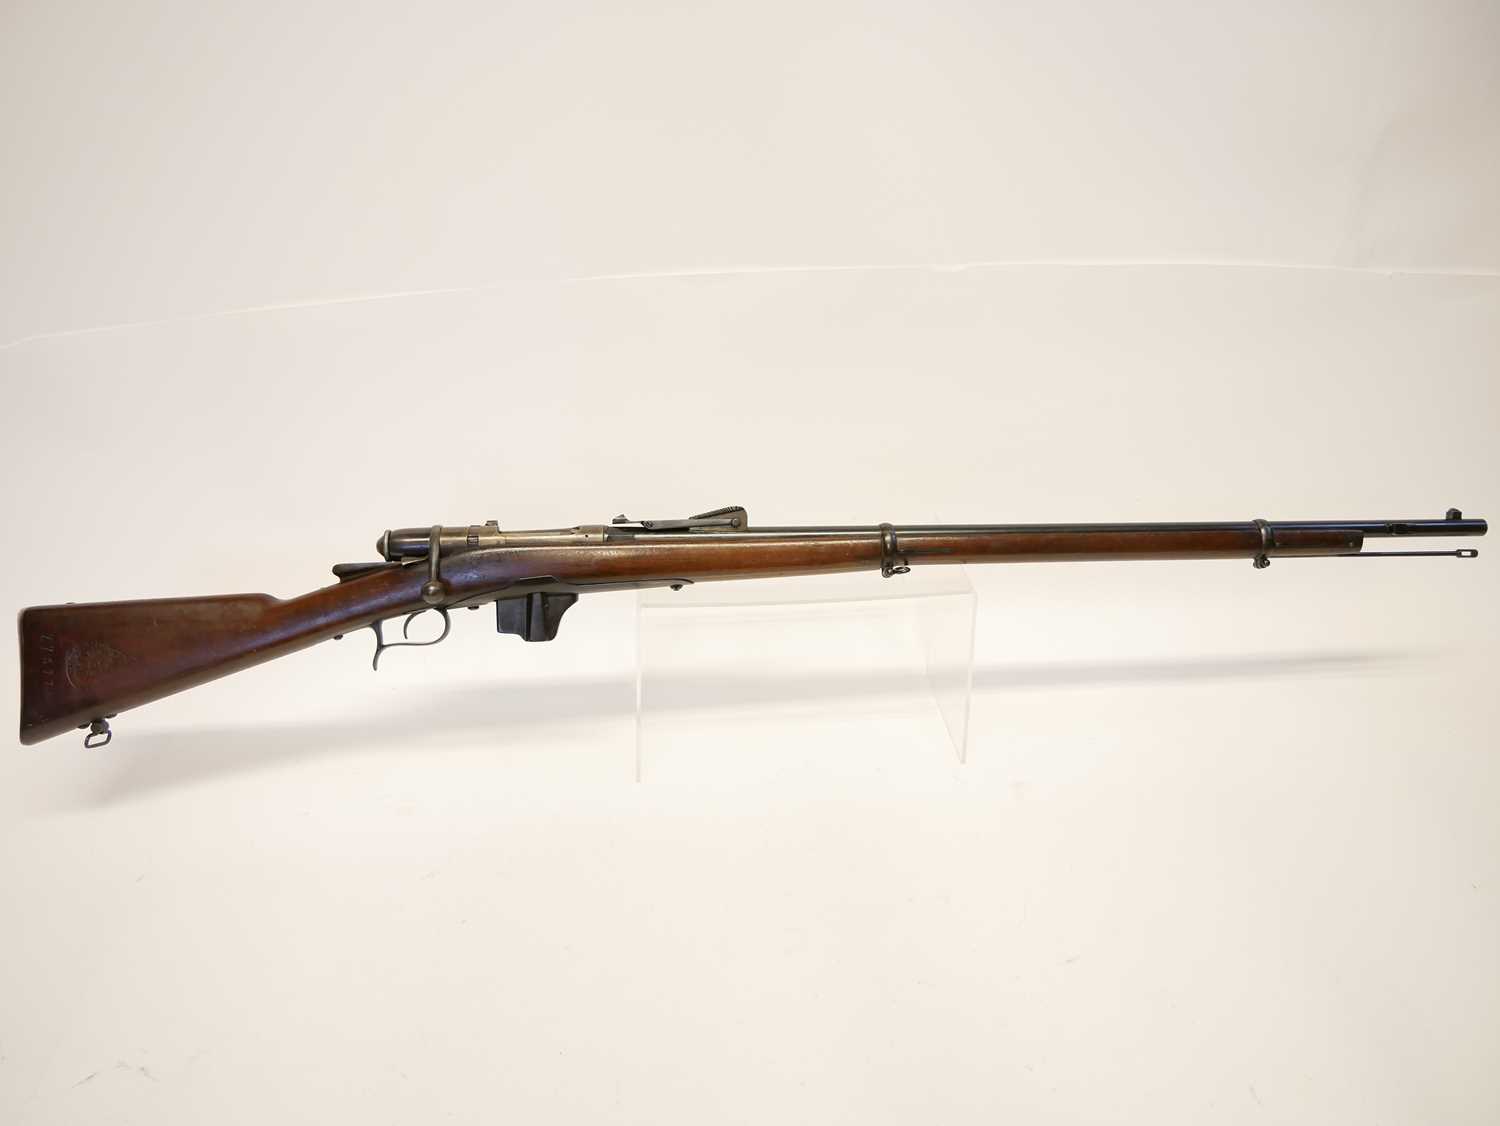 Italian Vetterli M.1870/87 10.35x47R bolt action rifle, serial number 5778, 33.5inch barrel fitted - Image 2 of 17